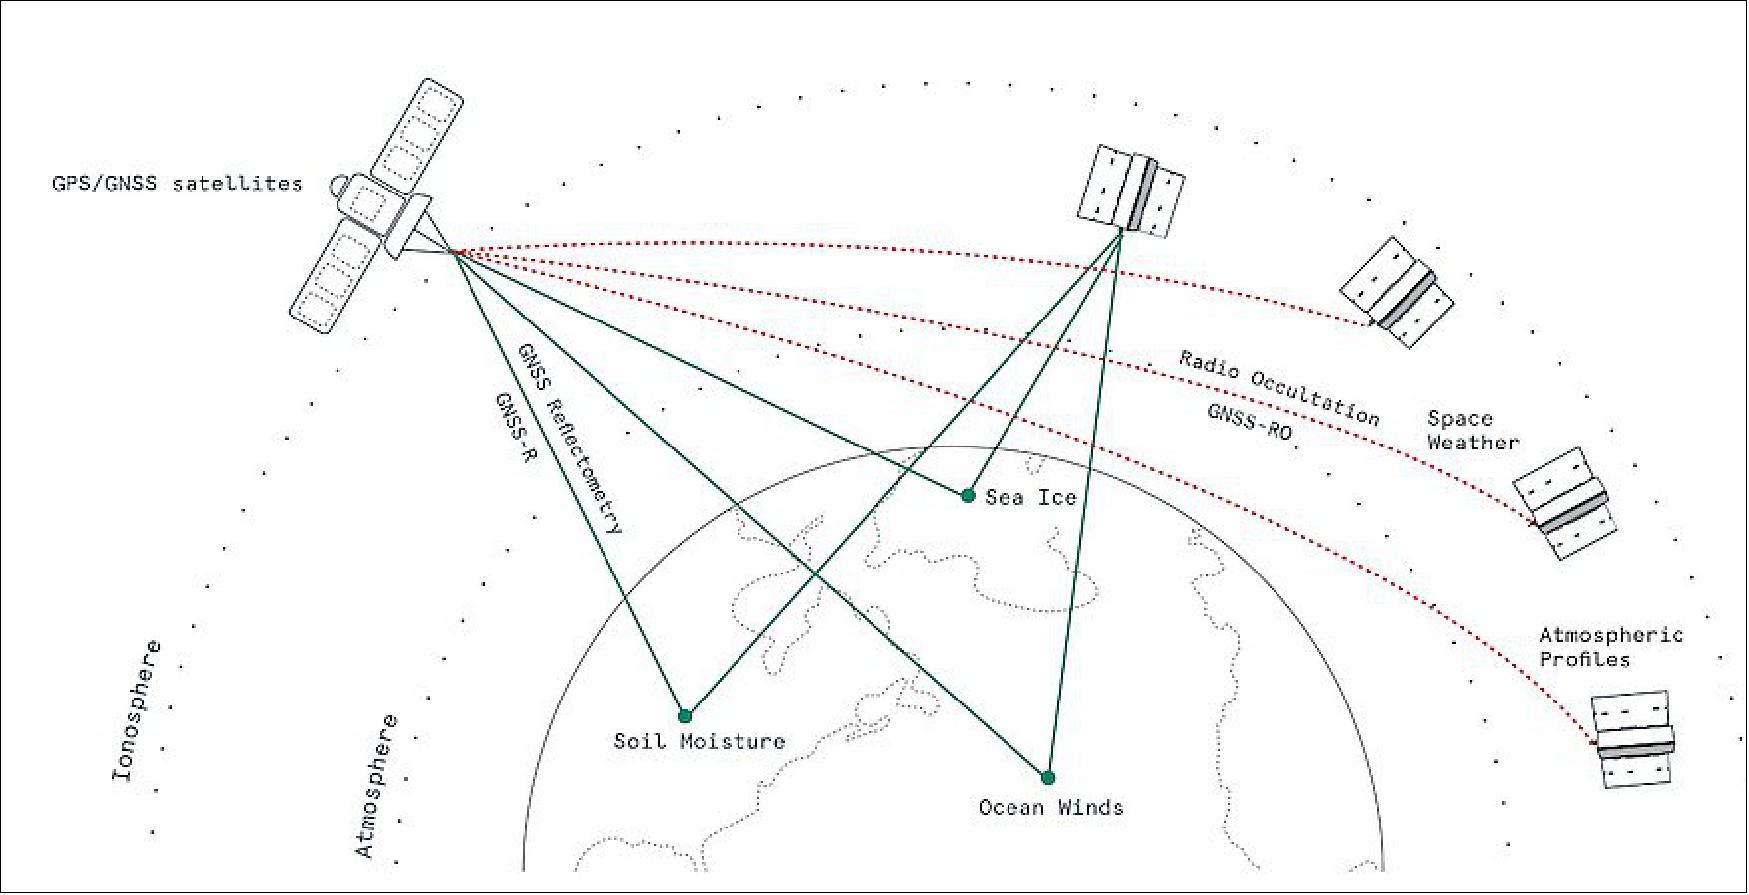 Figure 12: Spire Global, which operates a nanosatellite constellation that provides weather and tracking data, sells GPS radio occultation data to NOAA (National Oceanic and Atmospheric Administration) under a commercial data buy contract awarded in November 2020 (image credit:: Spire Global graphic)